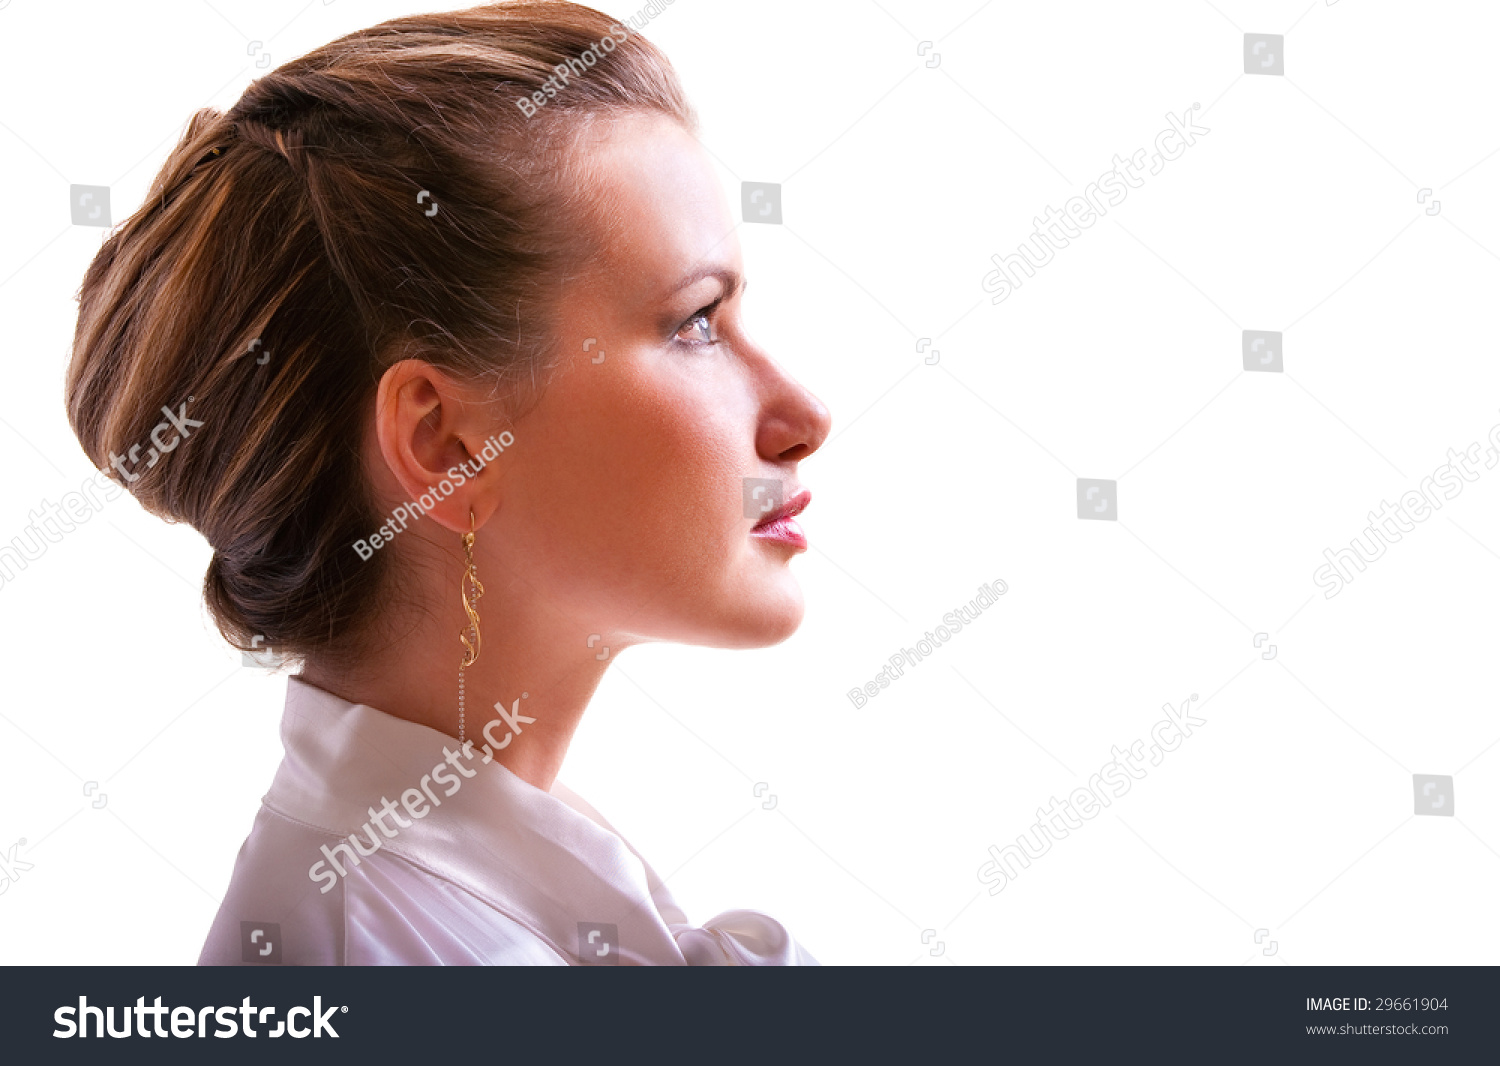 stock-photo-beautiful-girl-in-profile-it-is-isolated-on-white-background-29661904.jpg